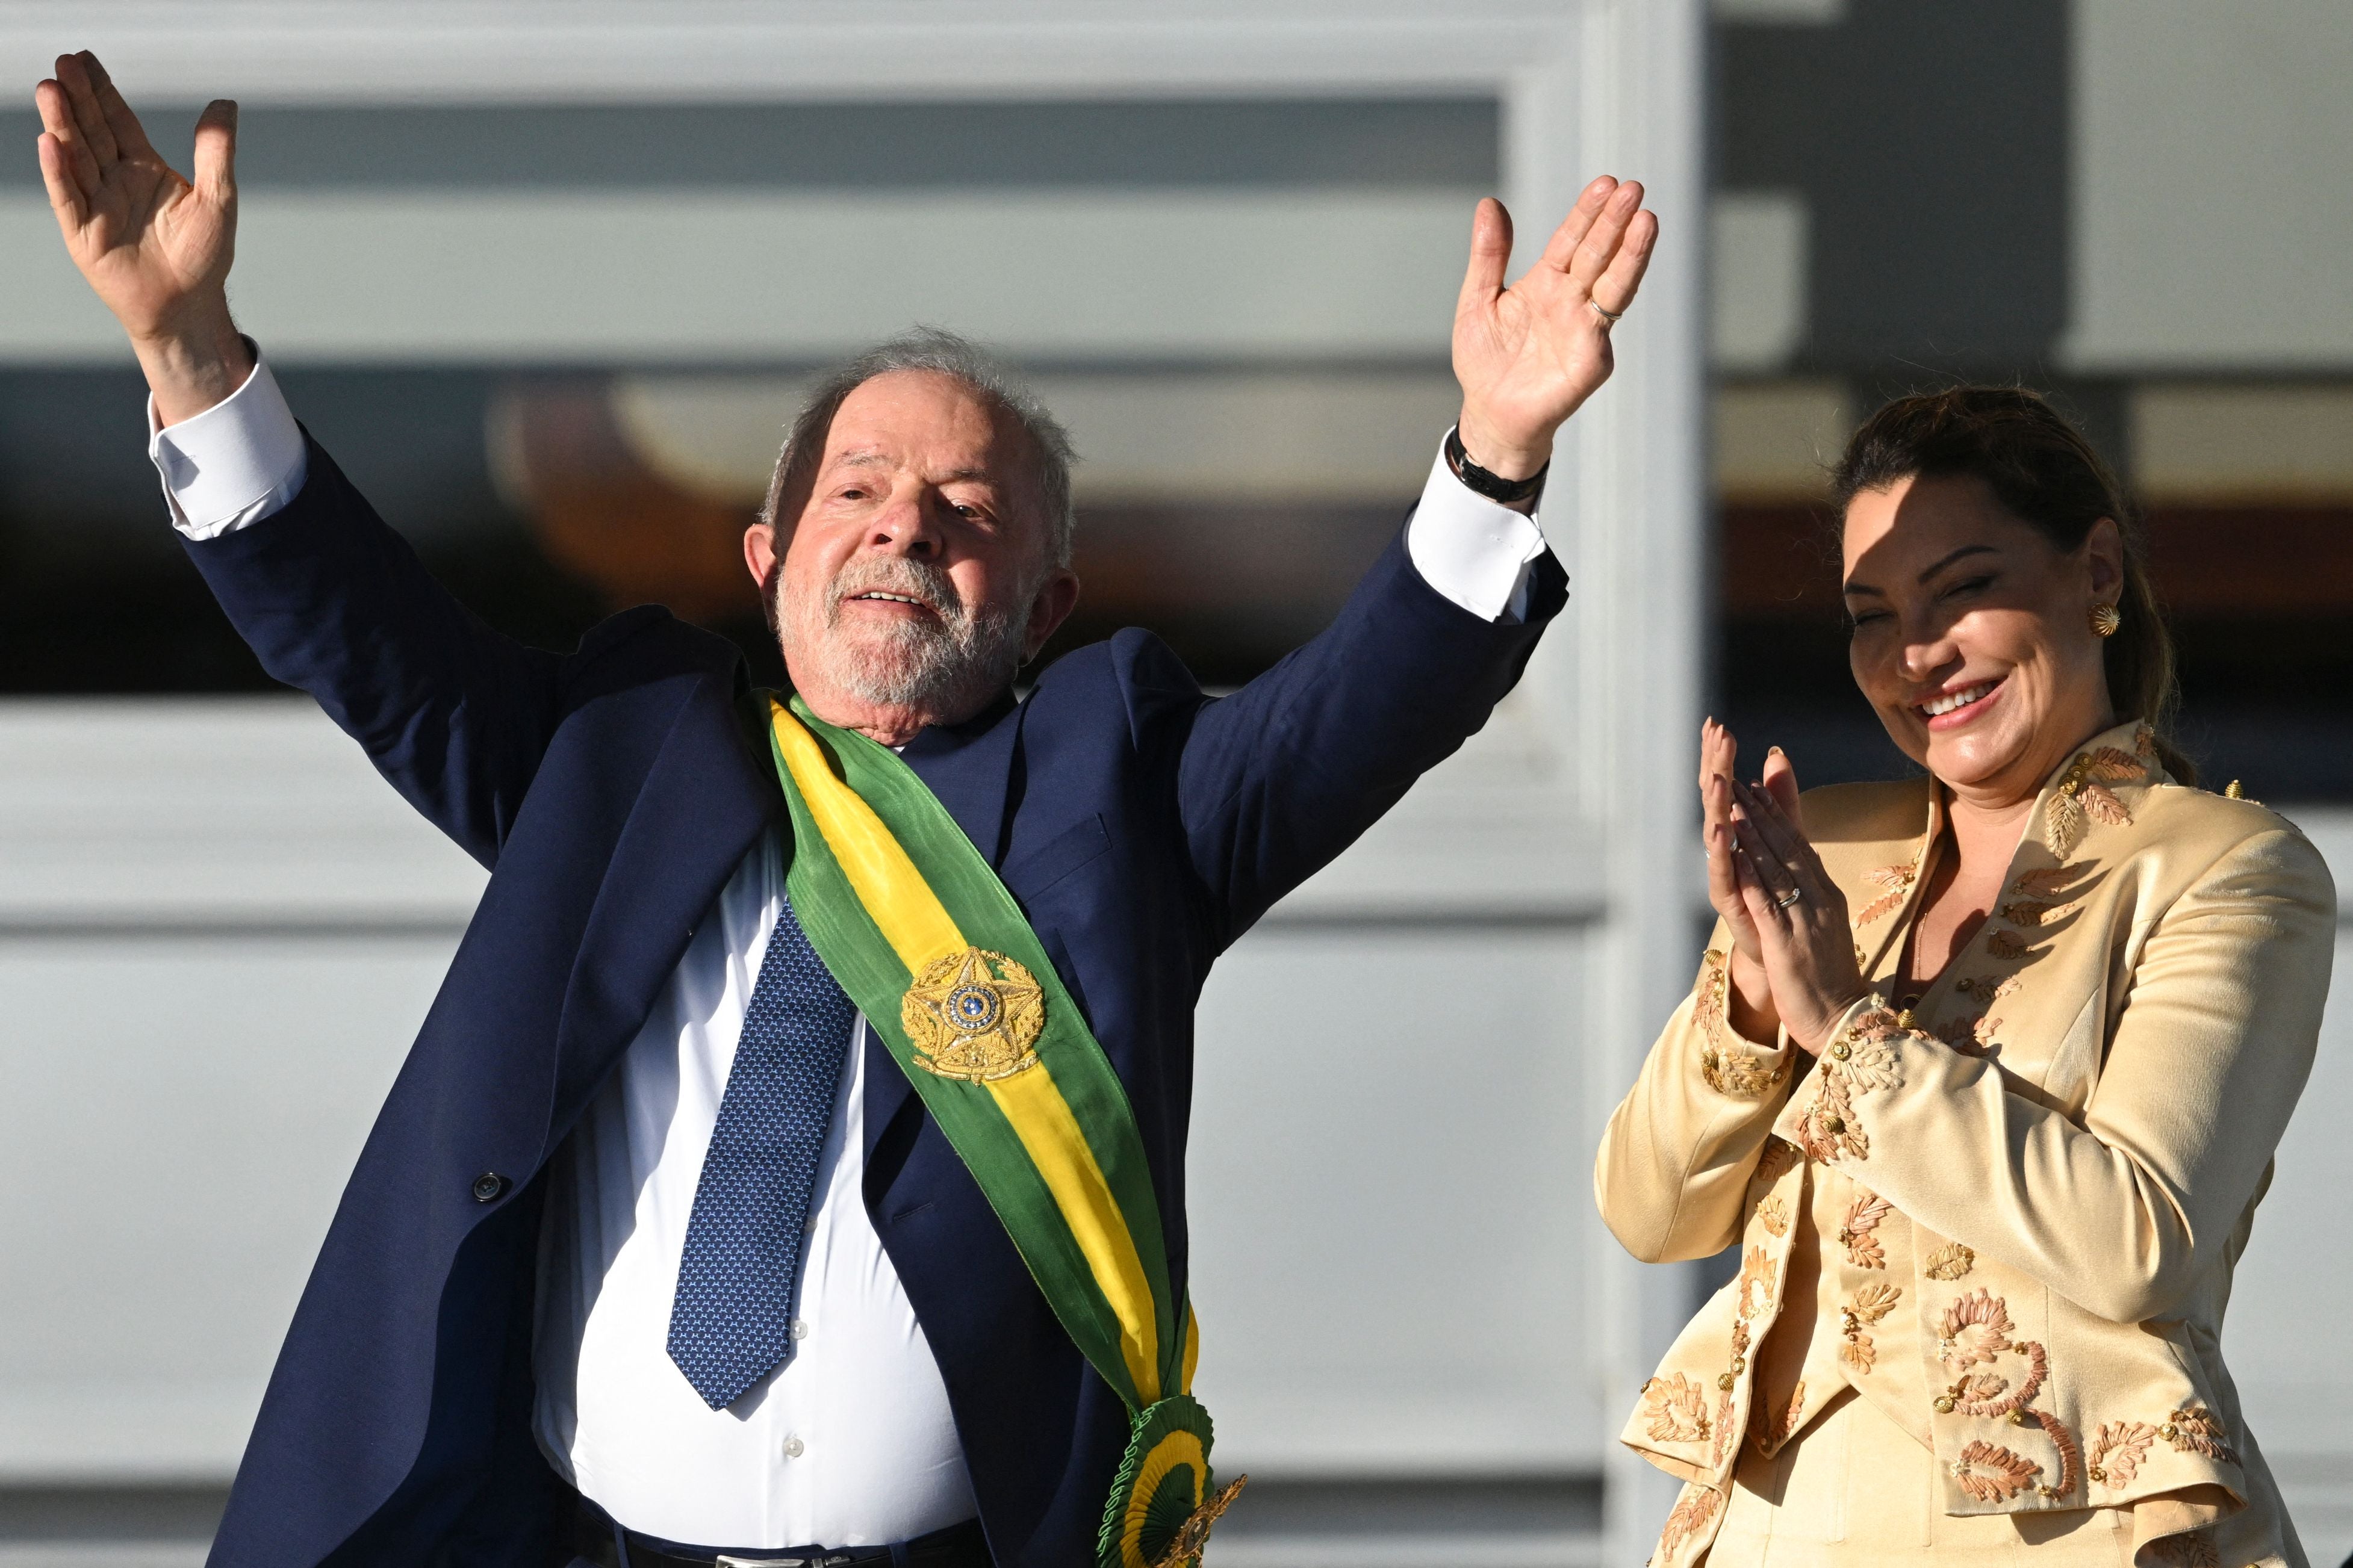 Lula said democracy was the great winner in the election